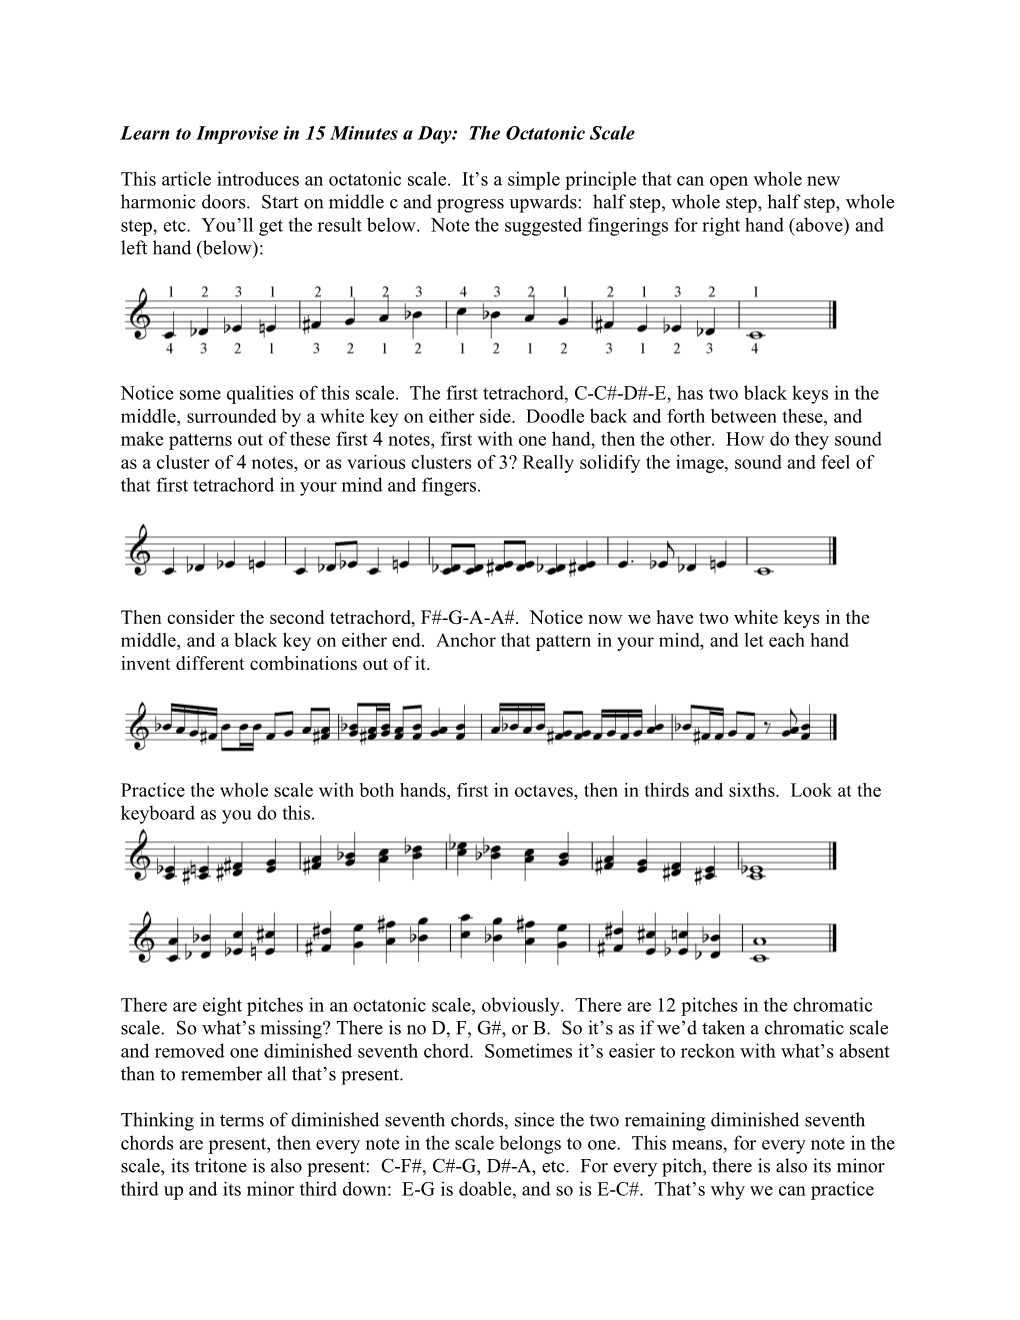 Intro to the Octatonic Scale